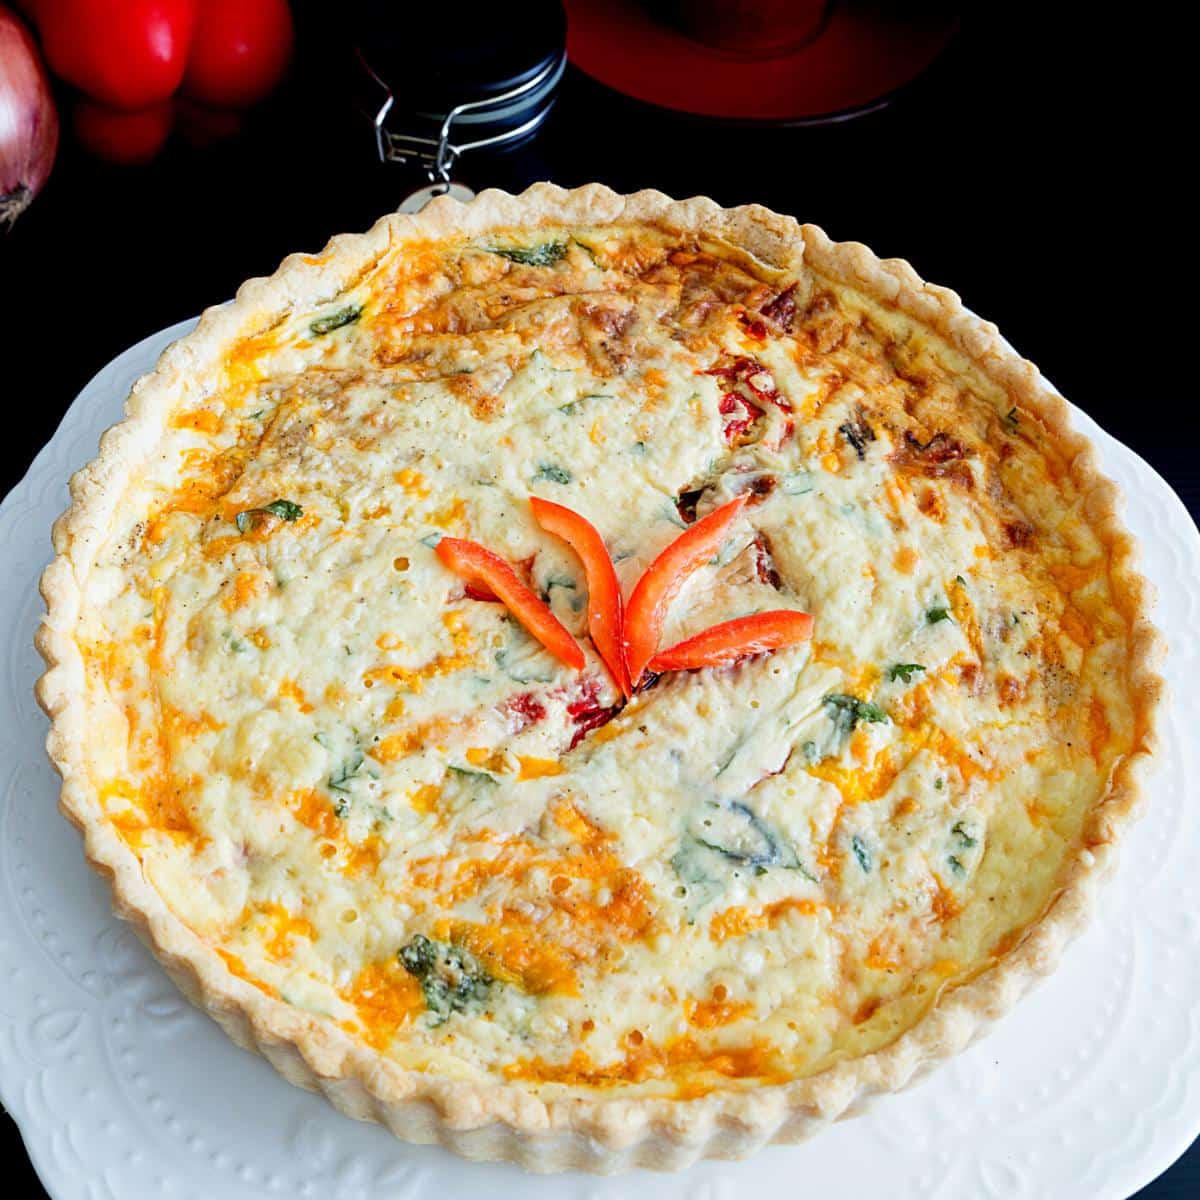 A baked quiche on a cake stand.